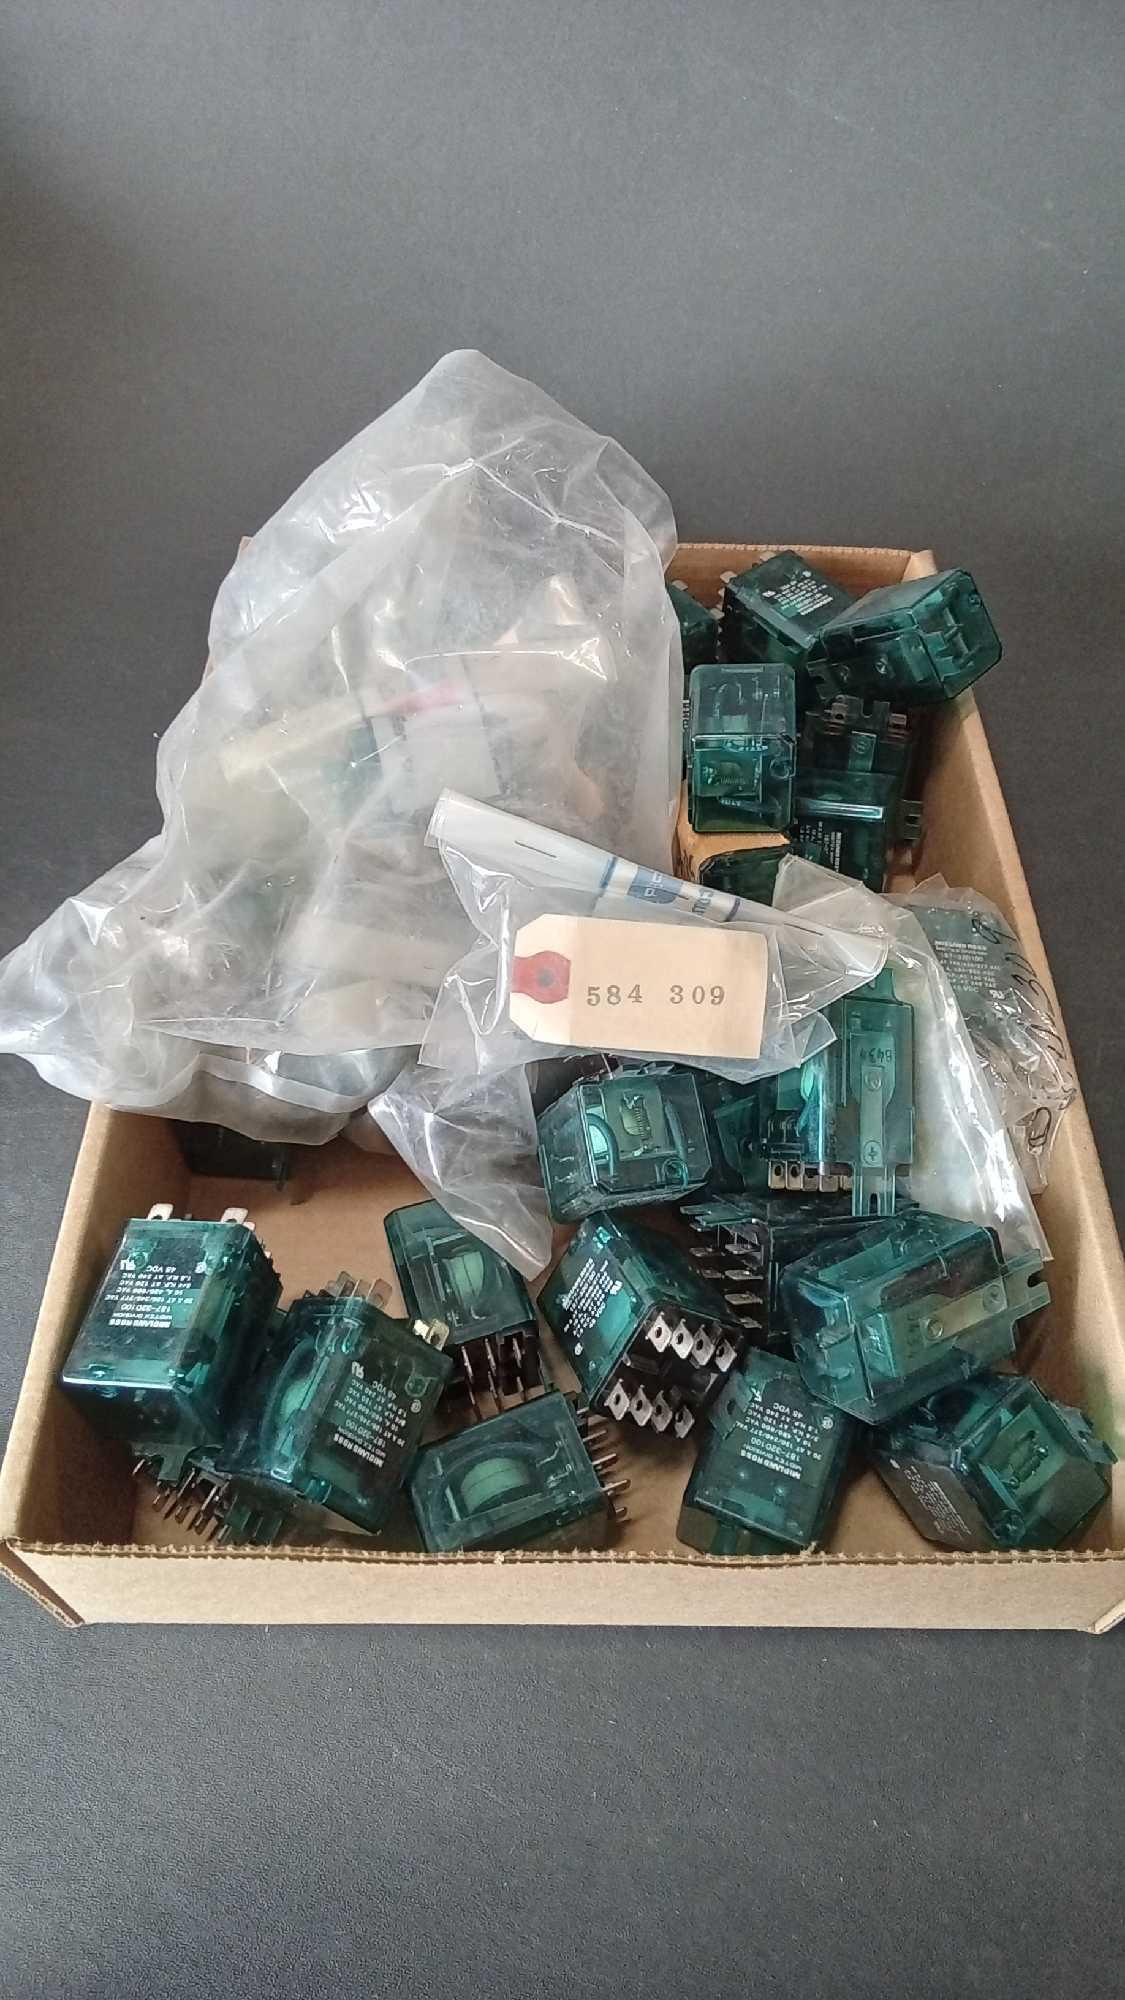 BOXES OF POWER SUPPLIES, NEW RELAYS, CINCH CONNECTORS & ELECTRICAL EXPENDABLES